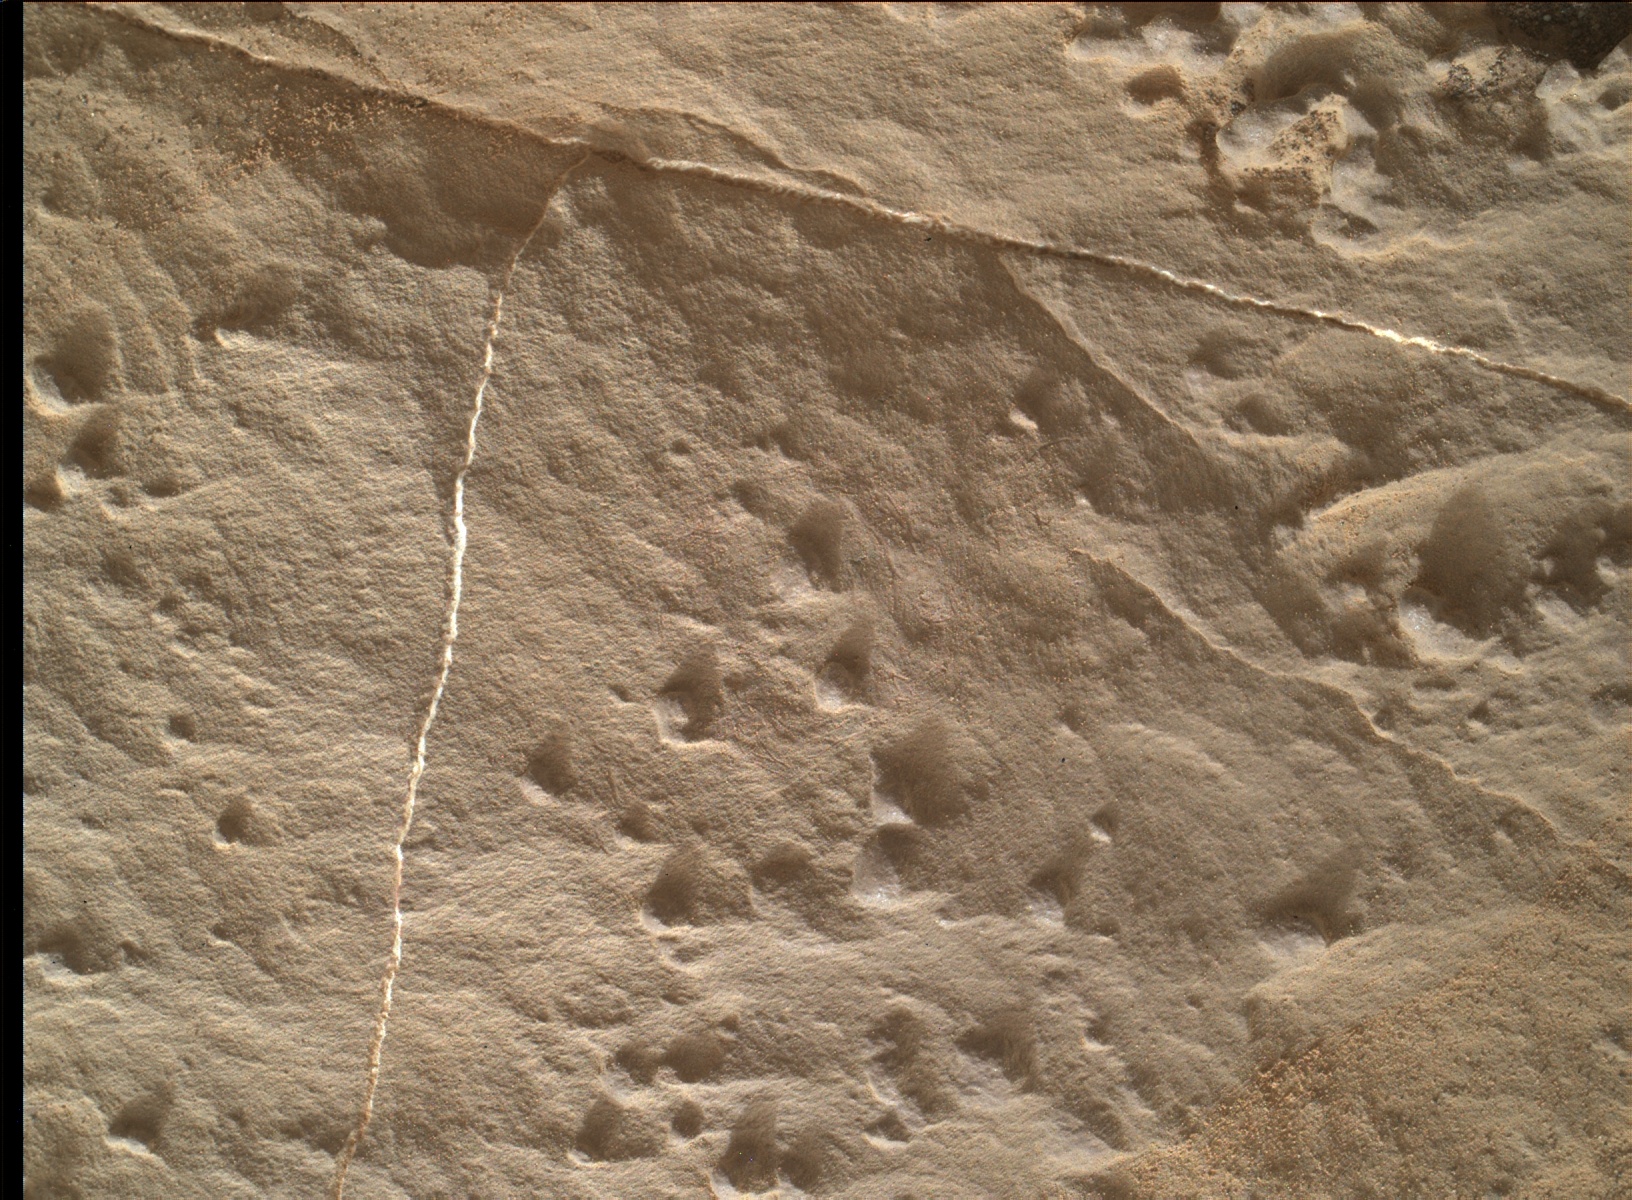 Nasa's Mars rover Curiosity acquired this image using its Mars Hand Lens Imager (MAHLI) on Sol 2013